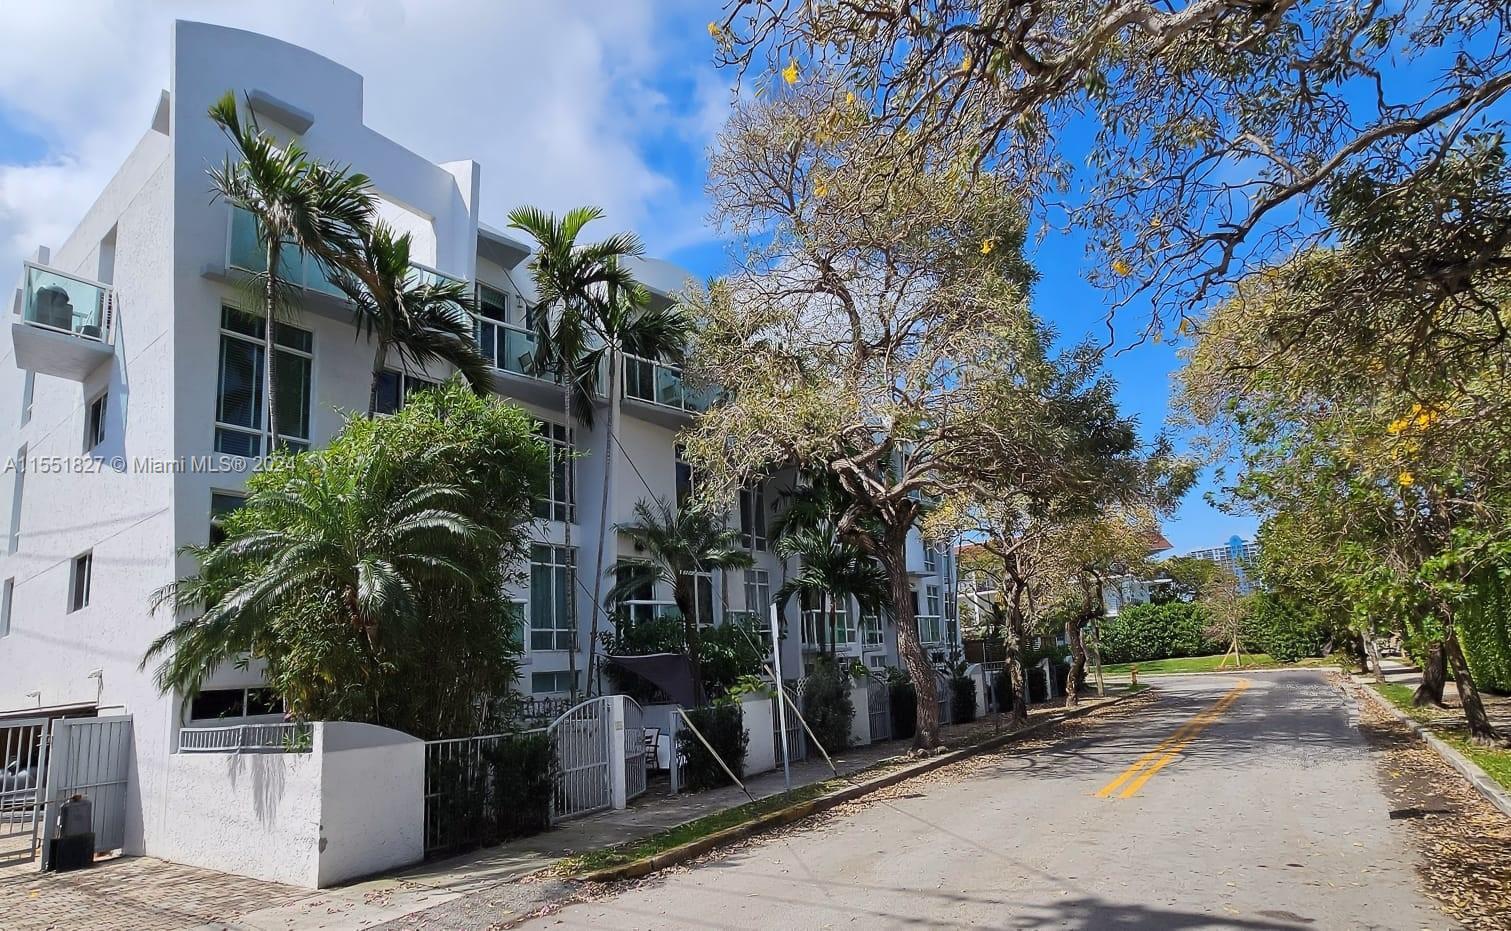 Rare opportunity to own a 3/3.5 townhouse in Miami Beach. Close to beach, South Beach, restaurants, 